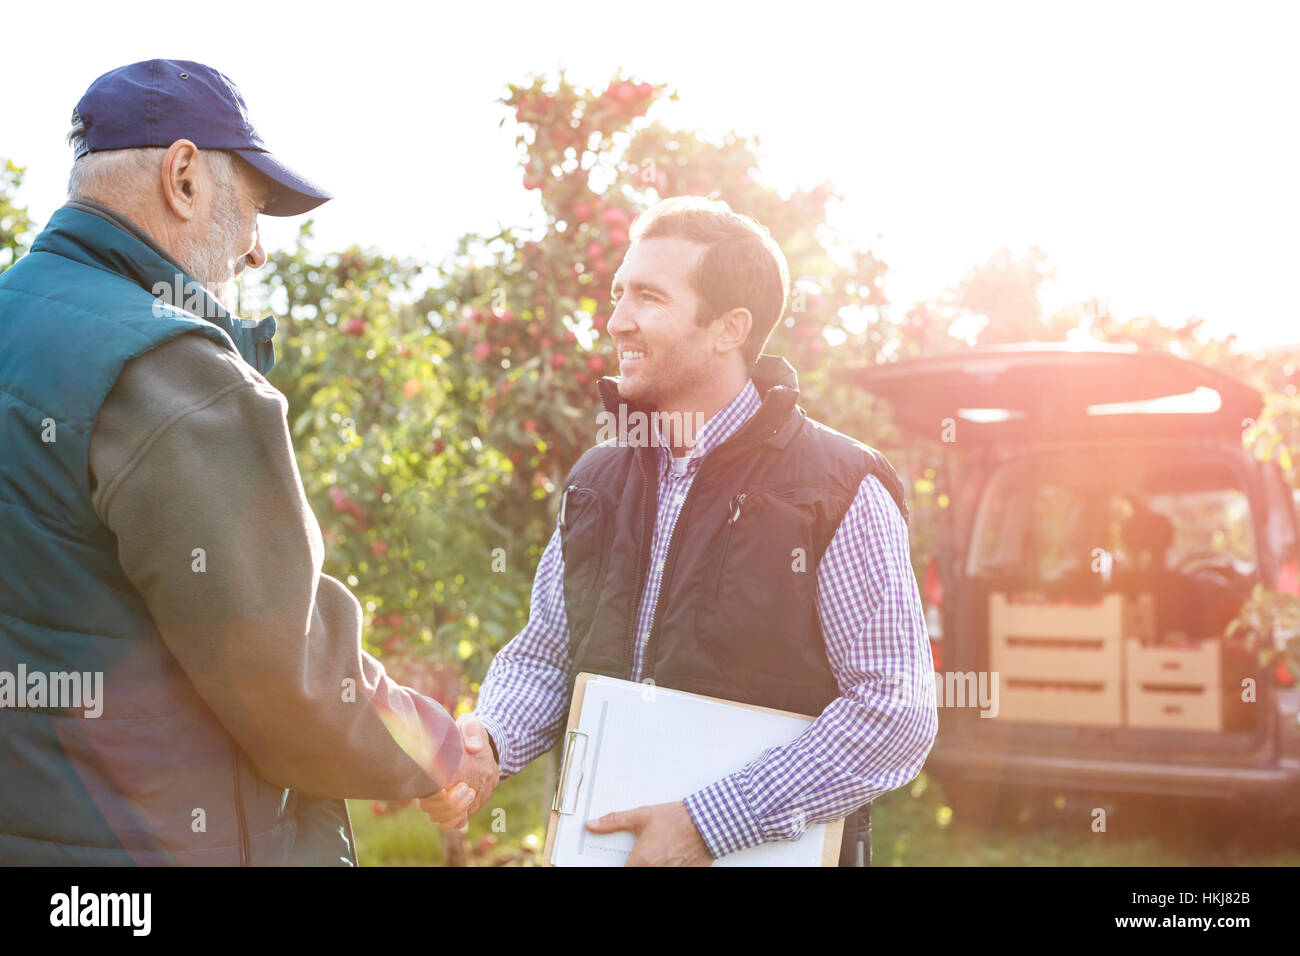 Male farmer and customer handshaking in sunny apple orchard Stock Photo